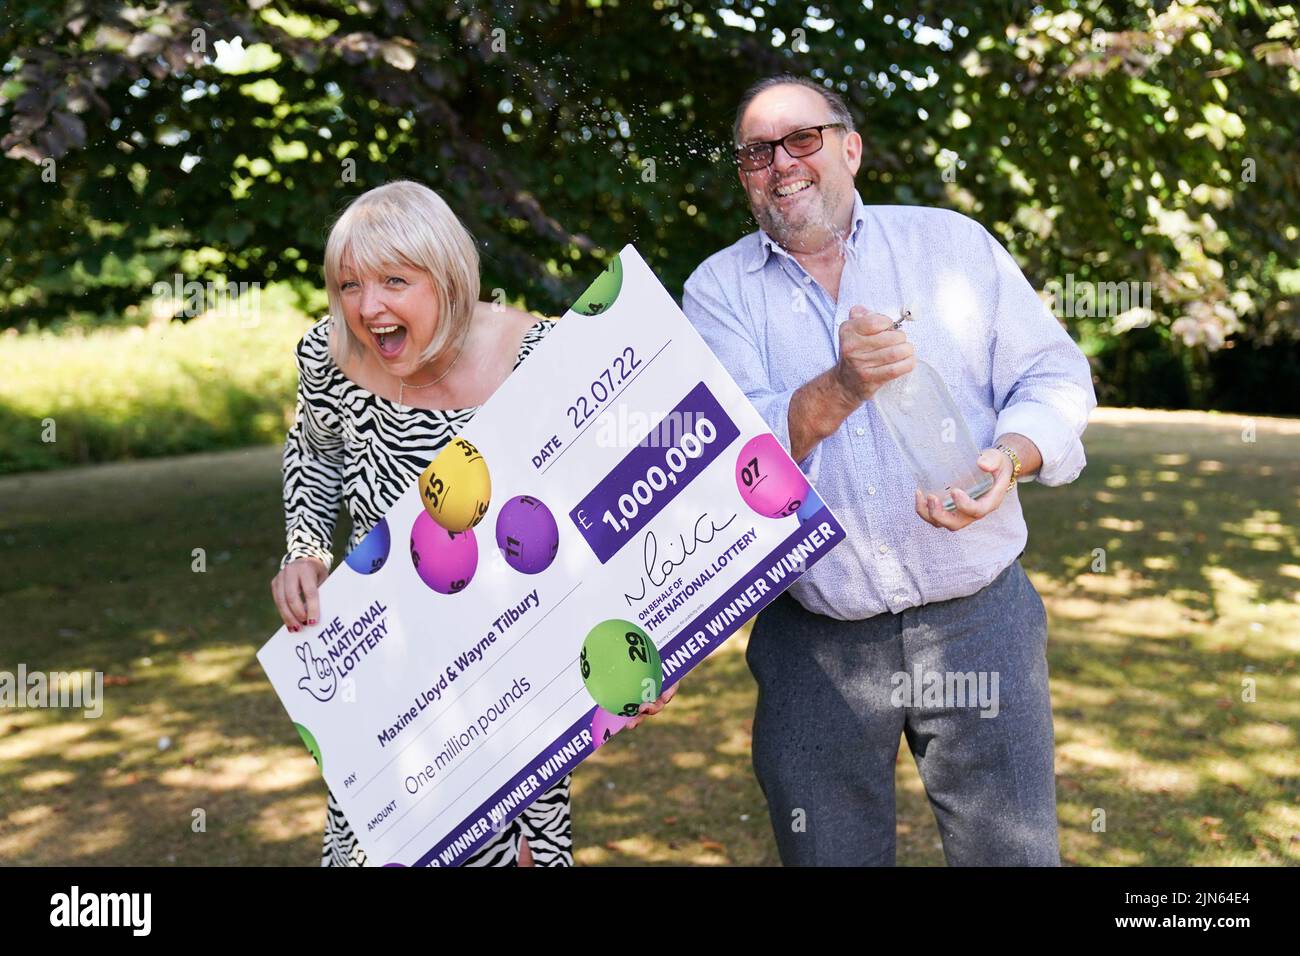 NHS worker Maxine Lloyd and her fiance Wayne Tilbury, from Kettering, celebrate her £1 million win on one of the National Lottery's instant win games at Barton Hall Hotel in Kettering, Northamptonshire, which became a double-celebration when she received the all-clear for breast cancer a few days later. Picture date: Tuesday August 9, 2022. Stock Photo